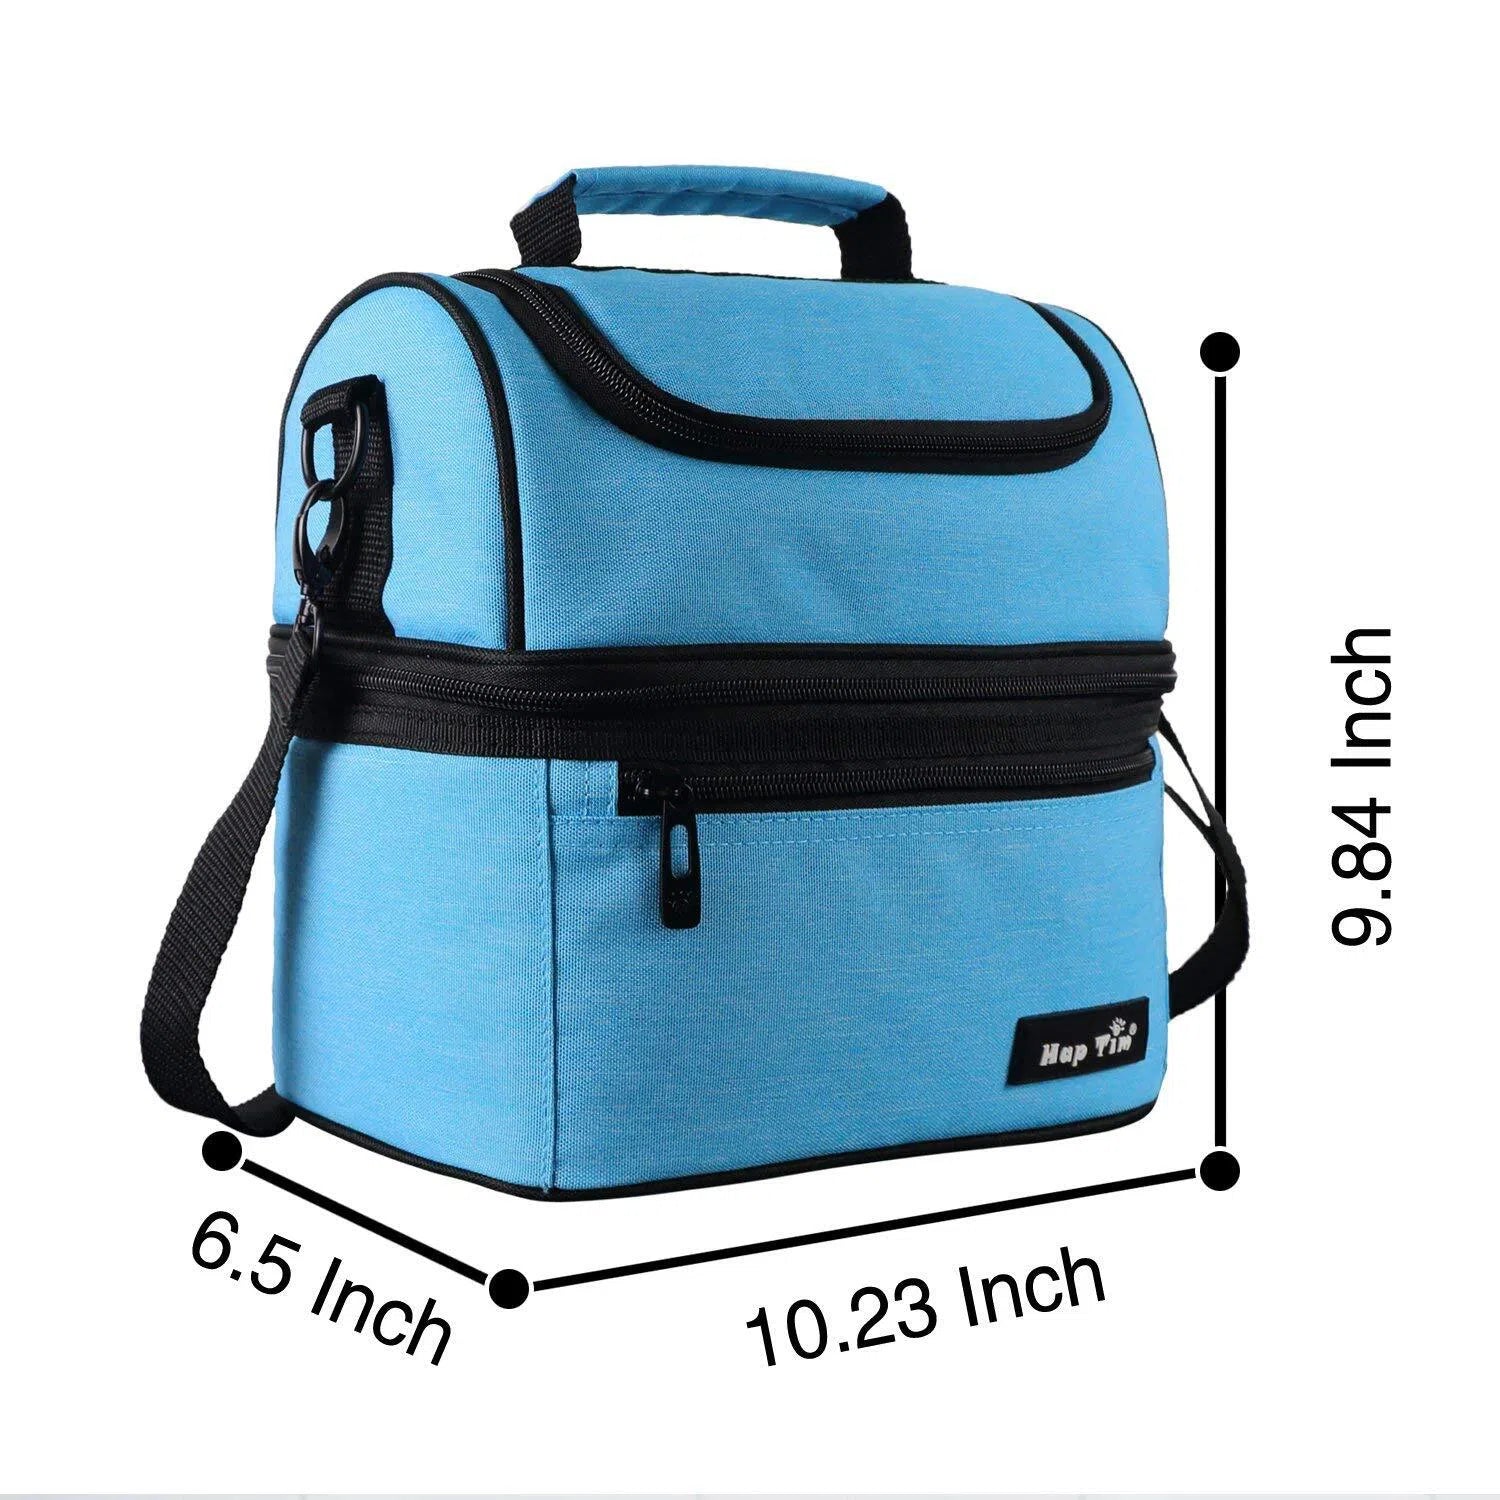 Hap Tim Lunch Box Insulated Lunch Bag Large Cooler Tote Bag (16040-BL)